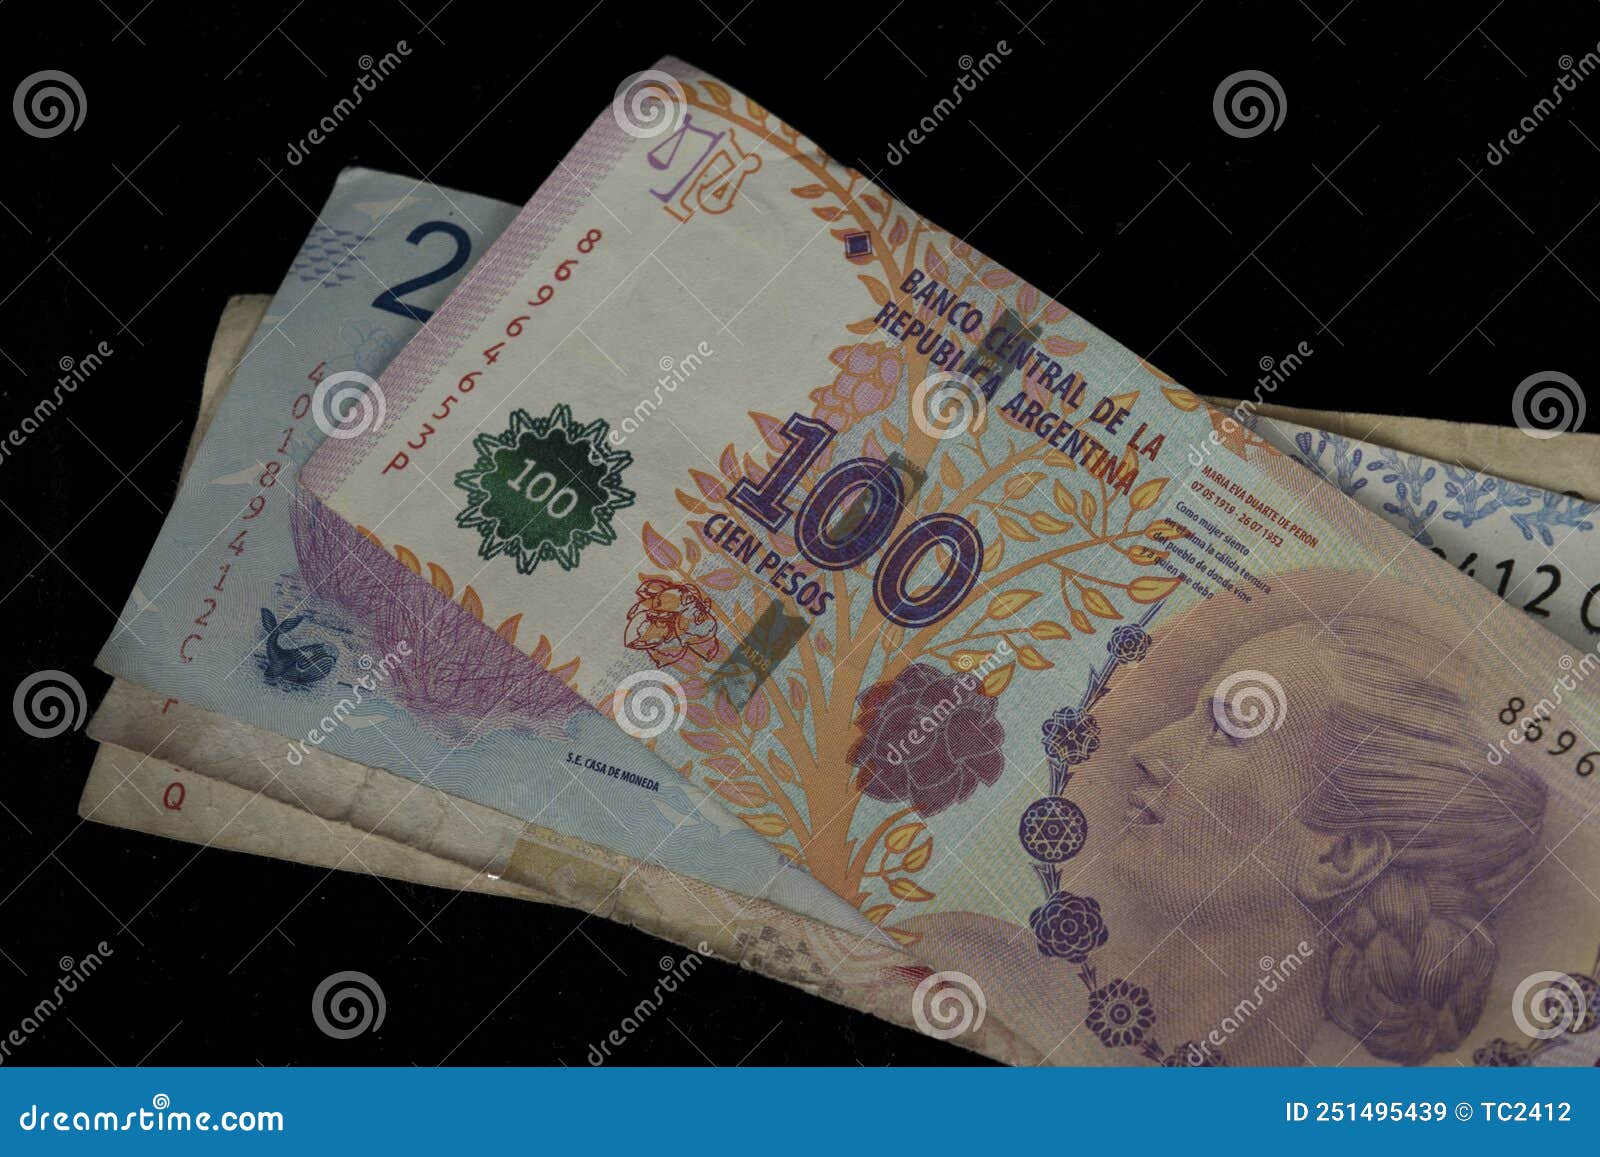 argentine oficial currency. peso argentino